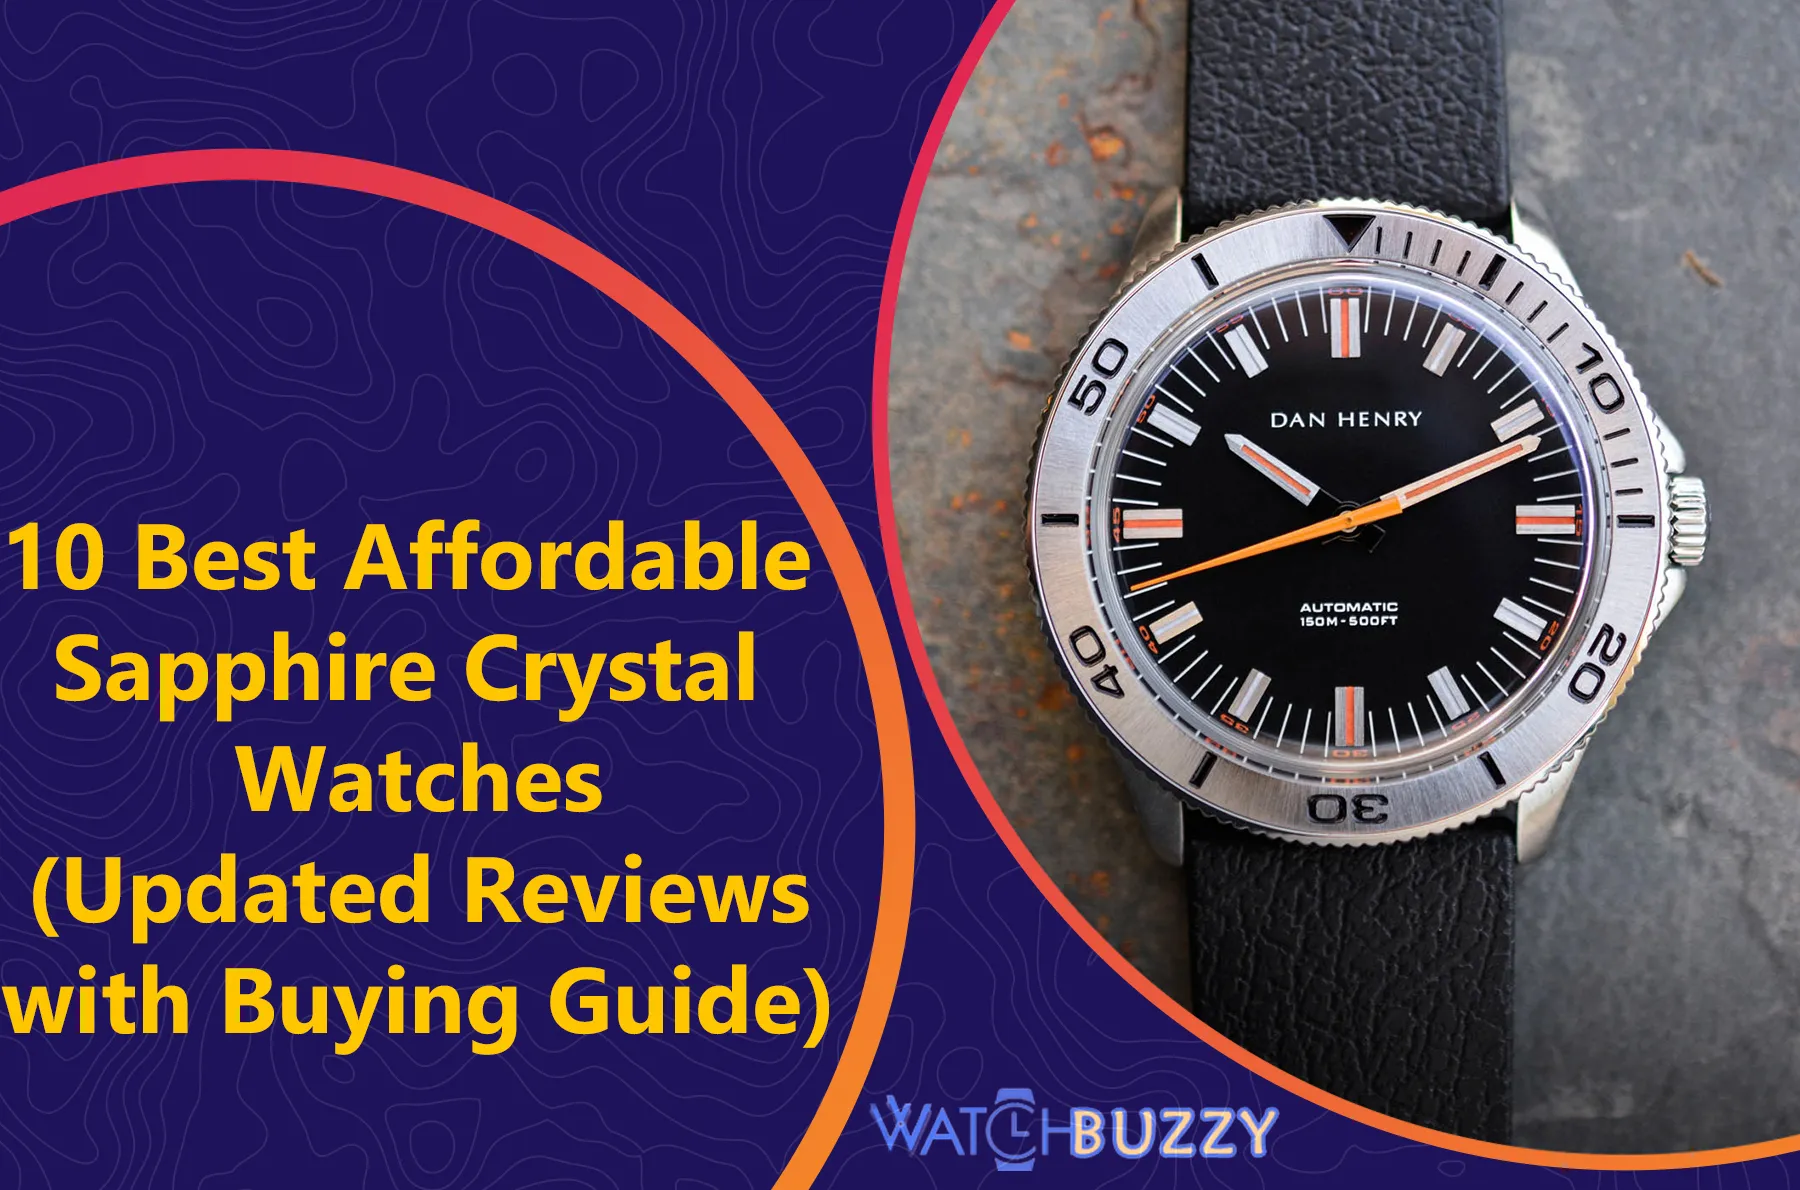 10 Best Affordable Sapphire Crystal Watches (Updated Reviews with Buying Guide)